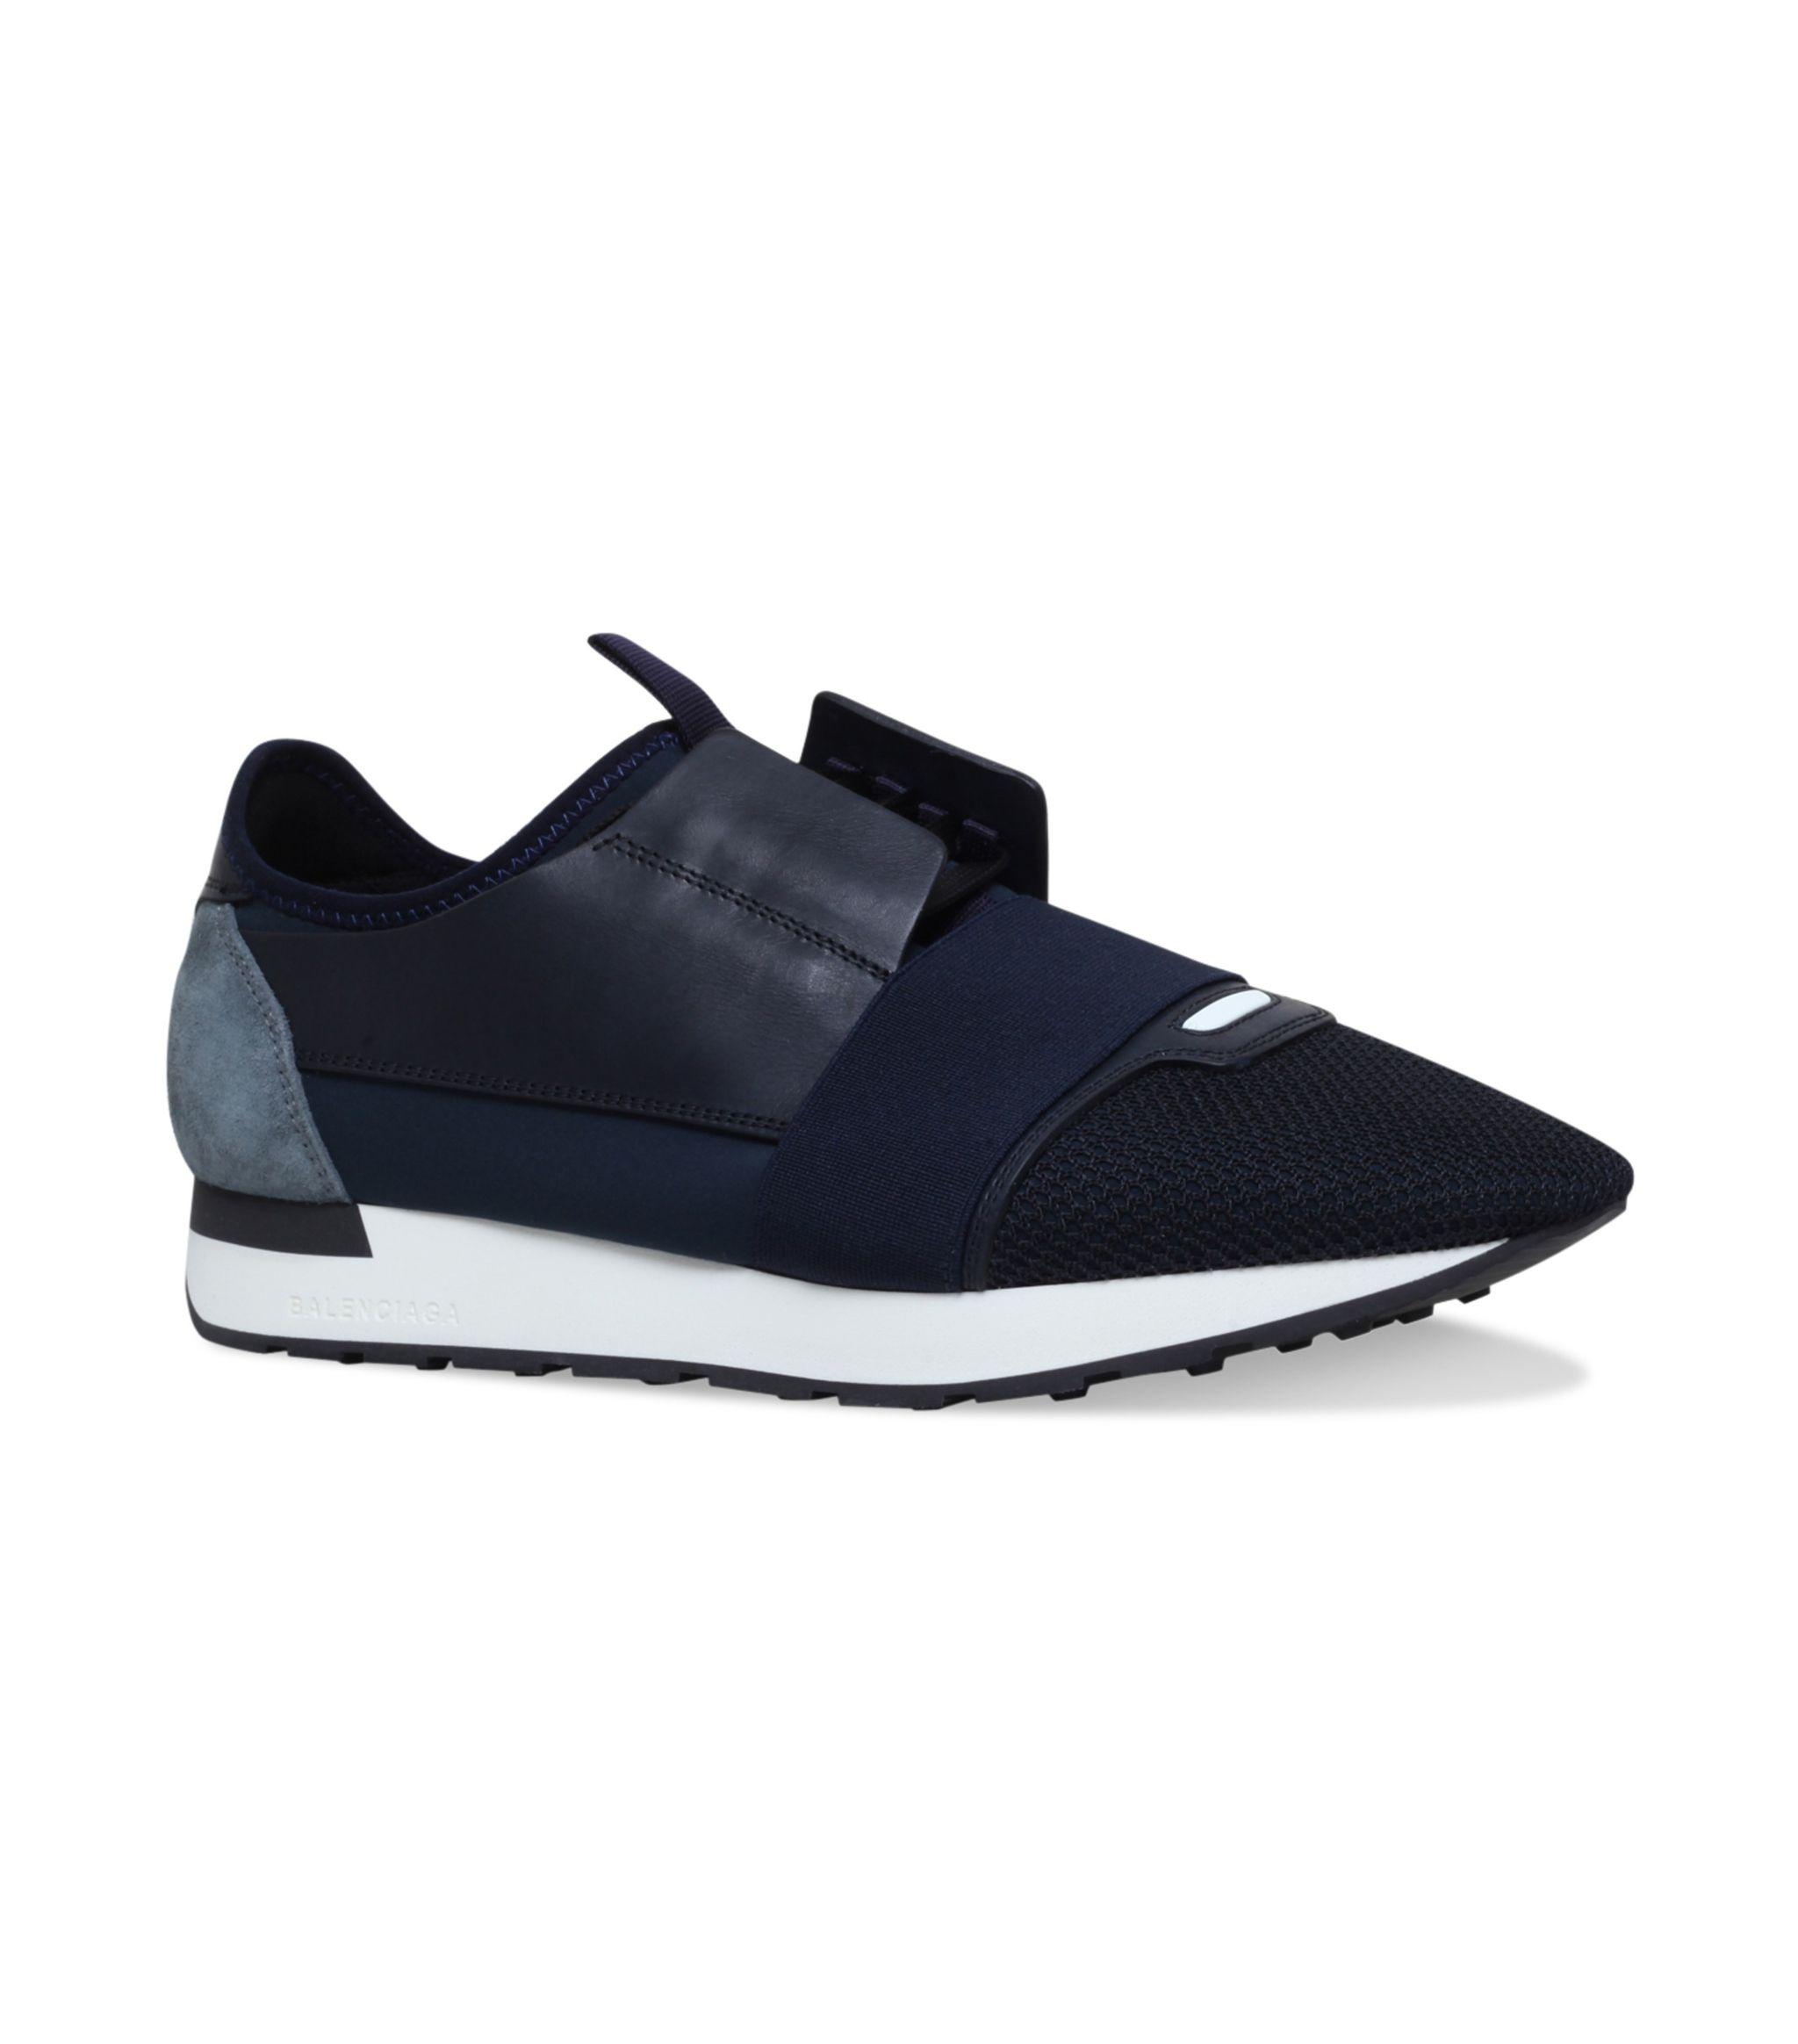 Balenciaga Leather Race Runner Sneakers in Navy (Blue) for Men - Save 2